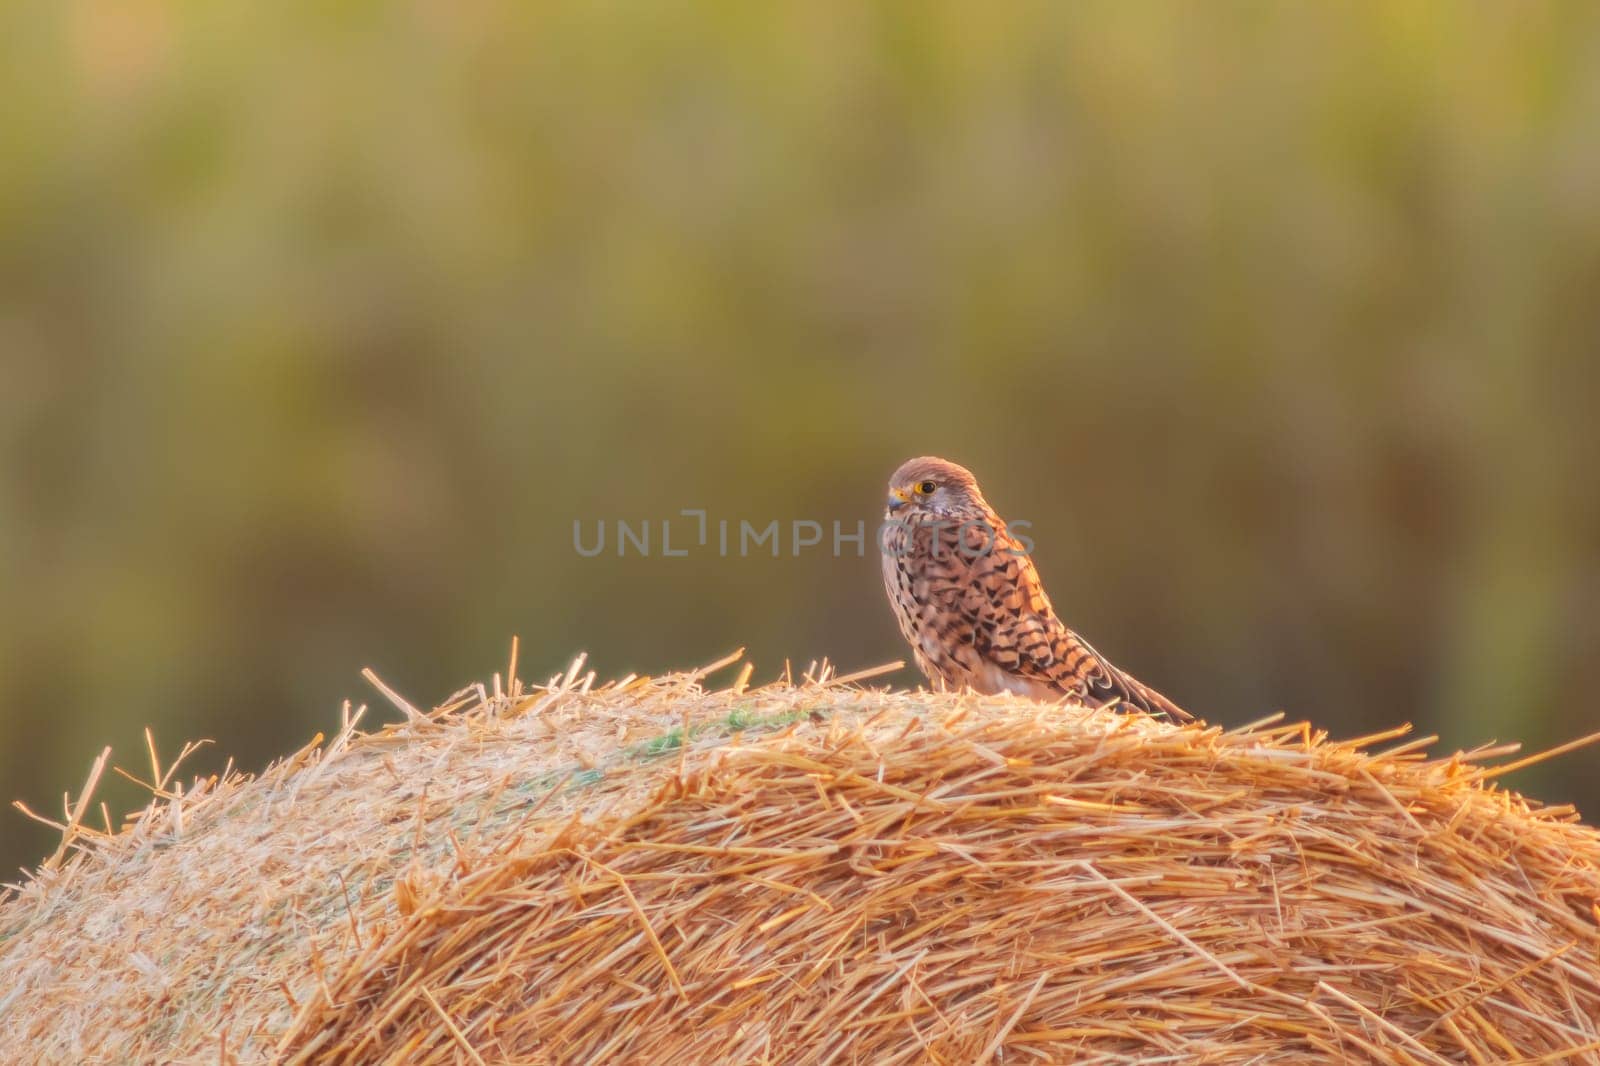 one Female kestrel (Falco tinnunculus) perched on a bale of straw scanning the field for prey by mario_plechaty_photography